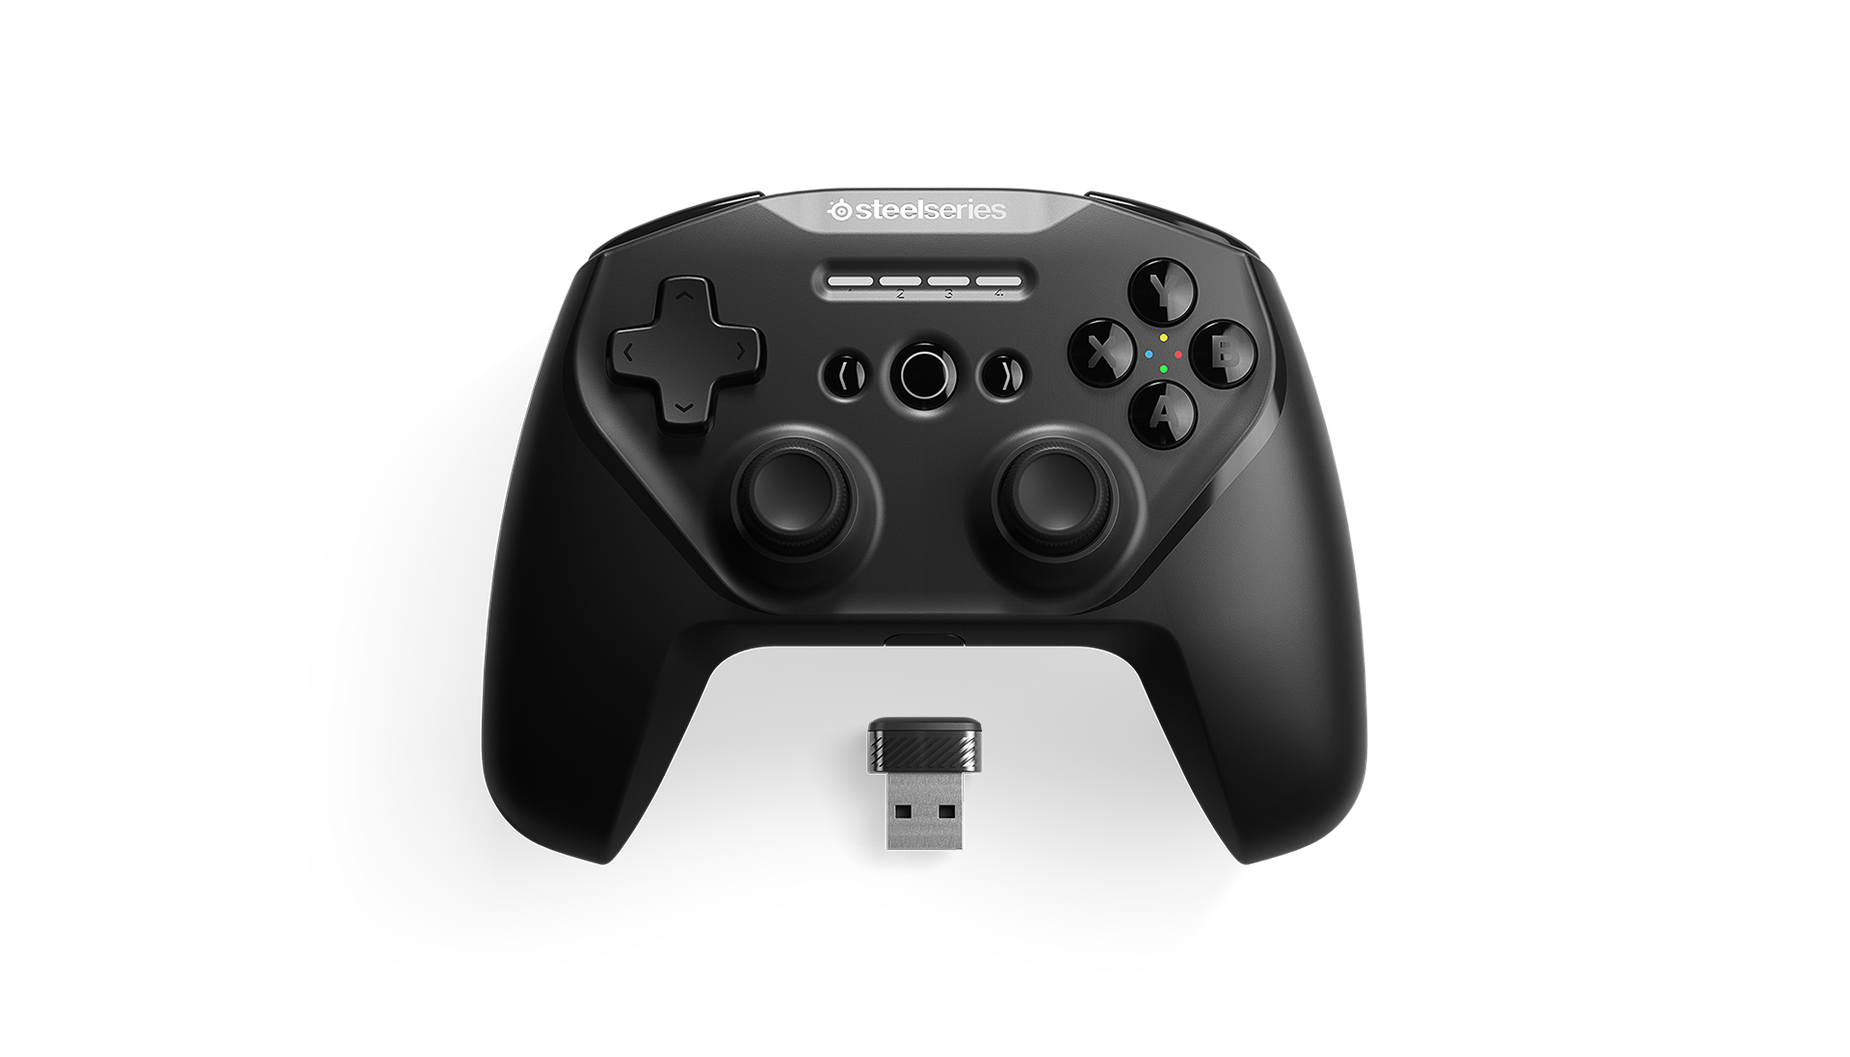 STEELSERIES STRATUS+ WIRELESS CONTROLLER FOR ANDROID - 69076